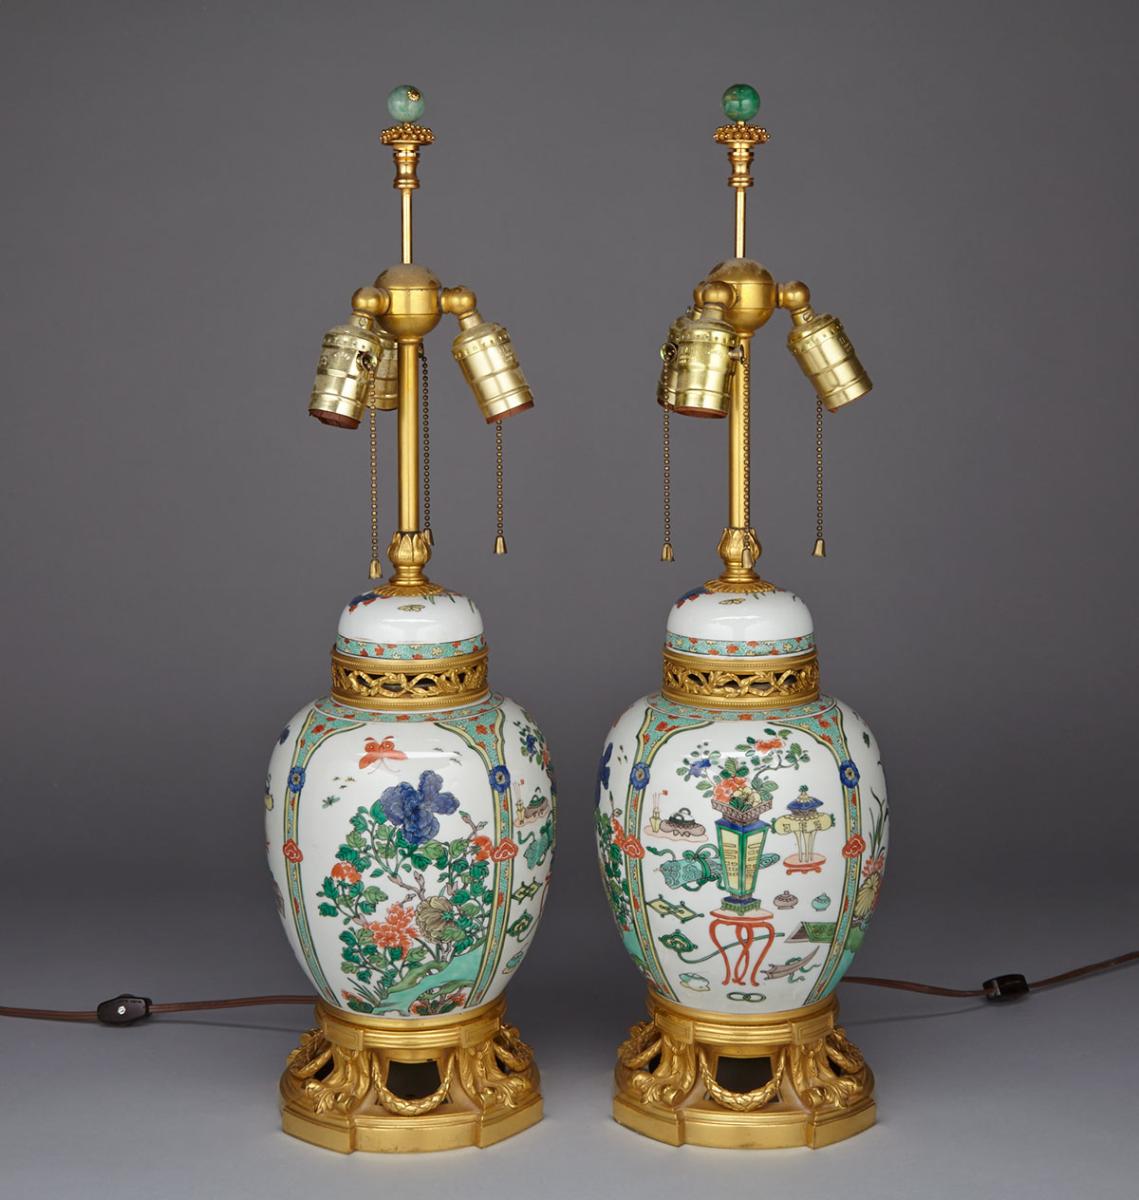 Pair of Ormolu Mounted Chinese Export Ginger Jar Form Table Lamps, mid 20th century